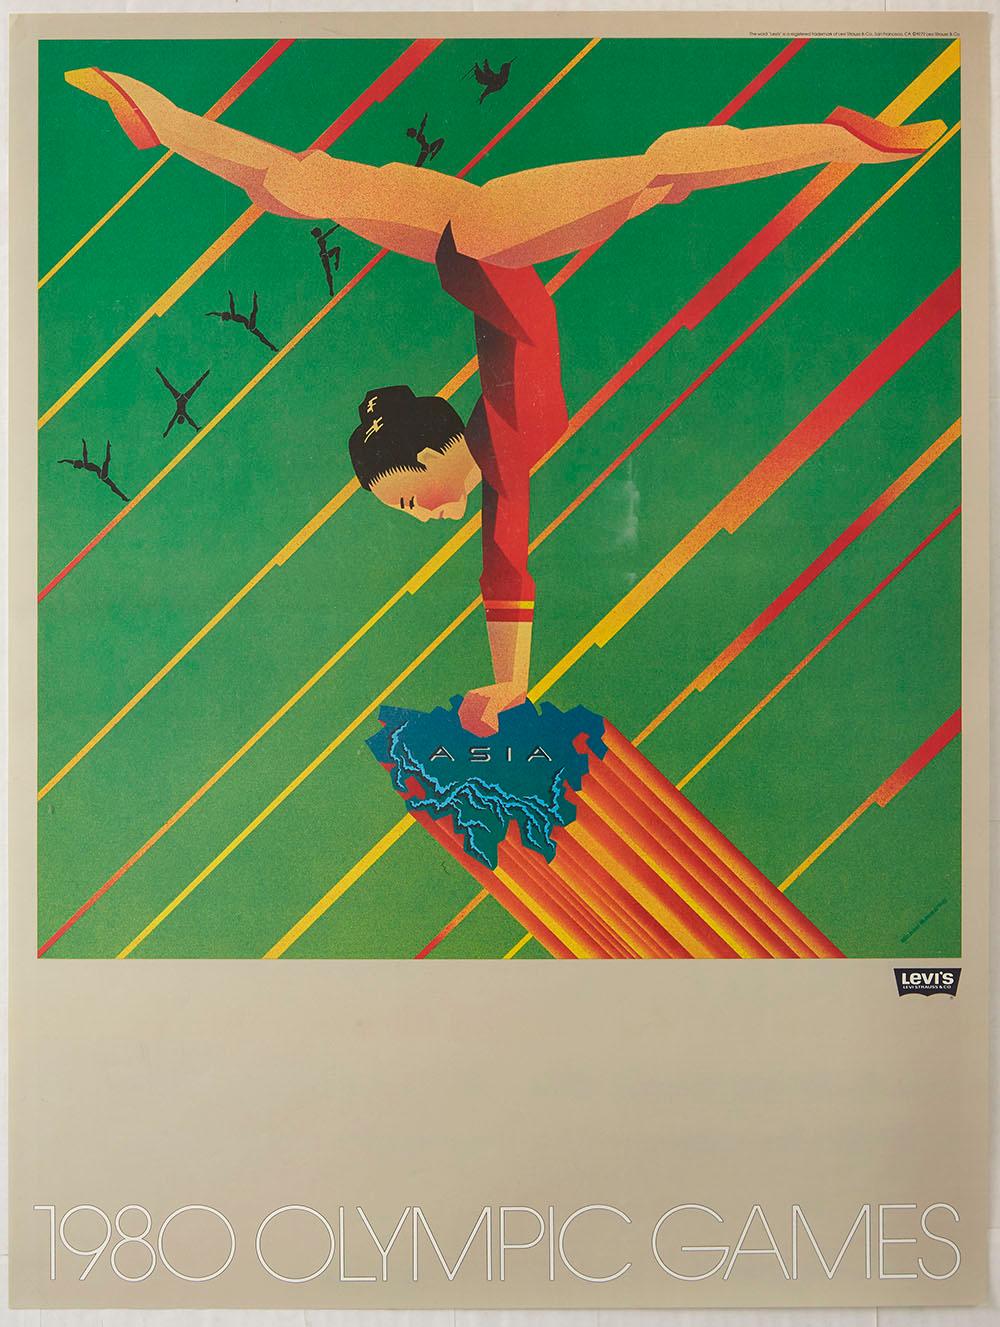 Set of six original vintage sport posters published by the Levi Strauss clothing brand (founded 1853) for the 1980 Moscow Olympic Games commissioned by the blue jeans manufacturer Levi's as official sponsors of the US team for the 1980 Olympic